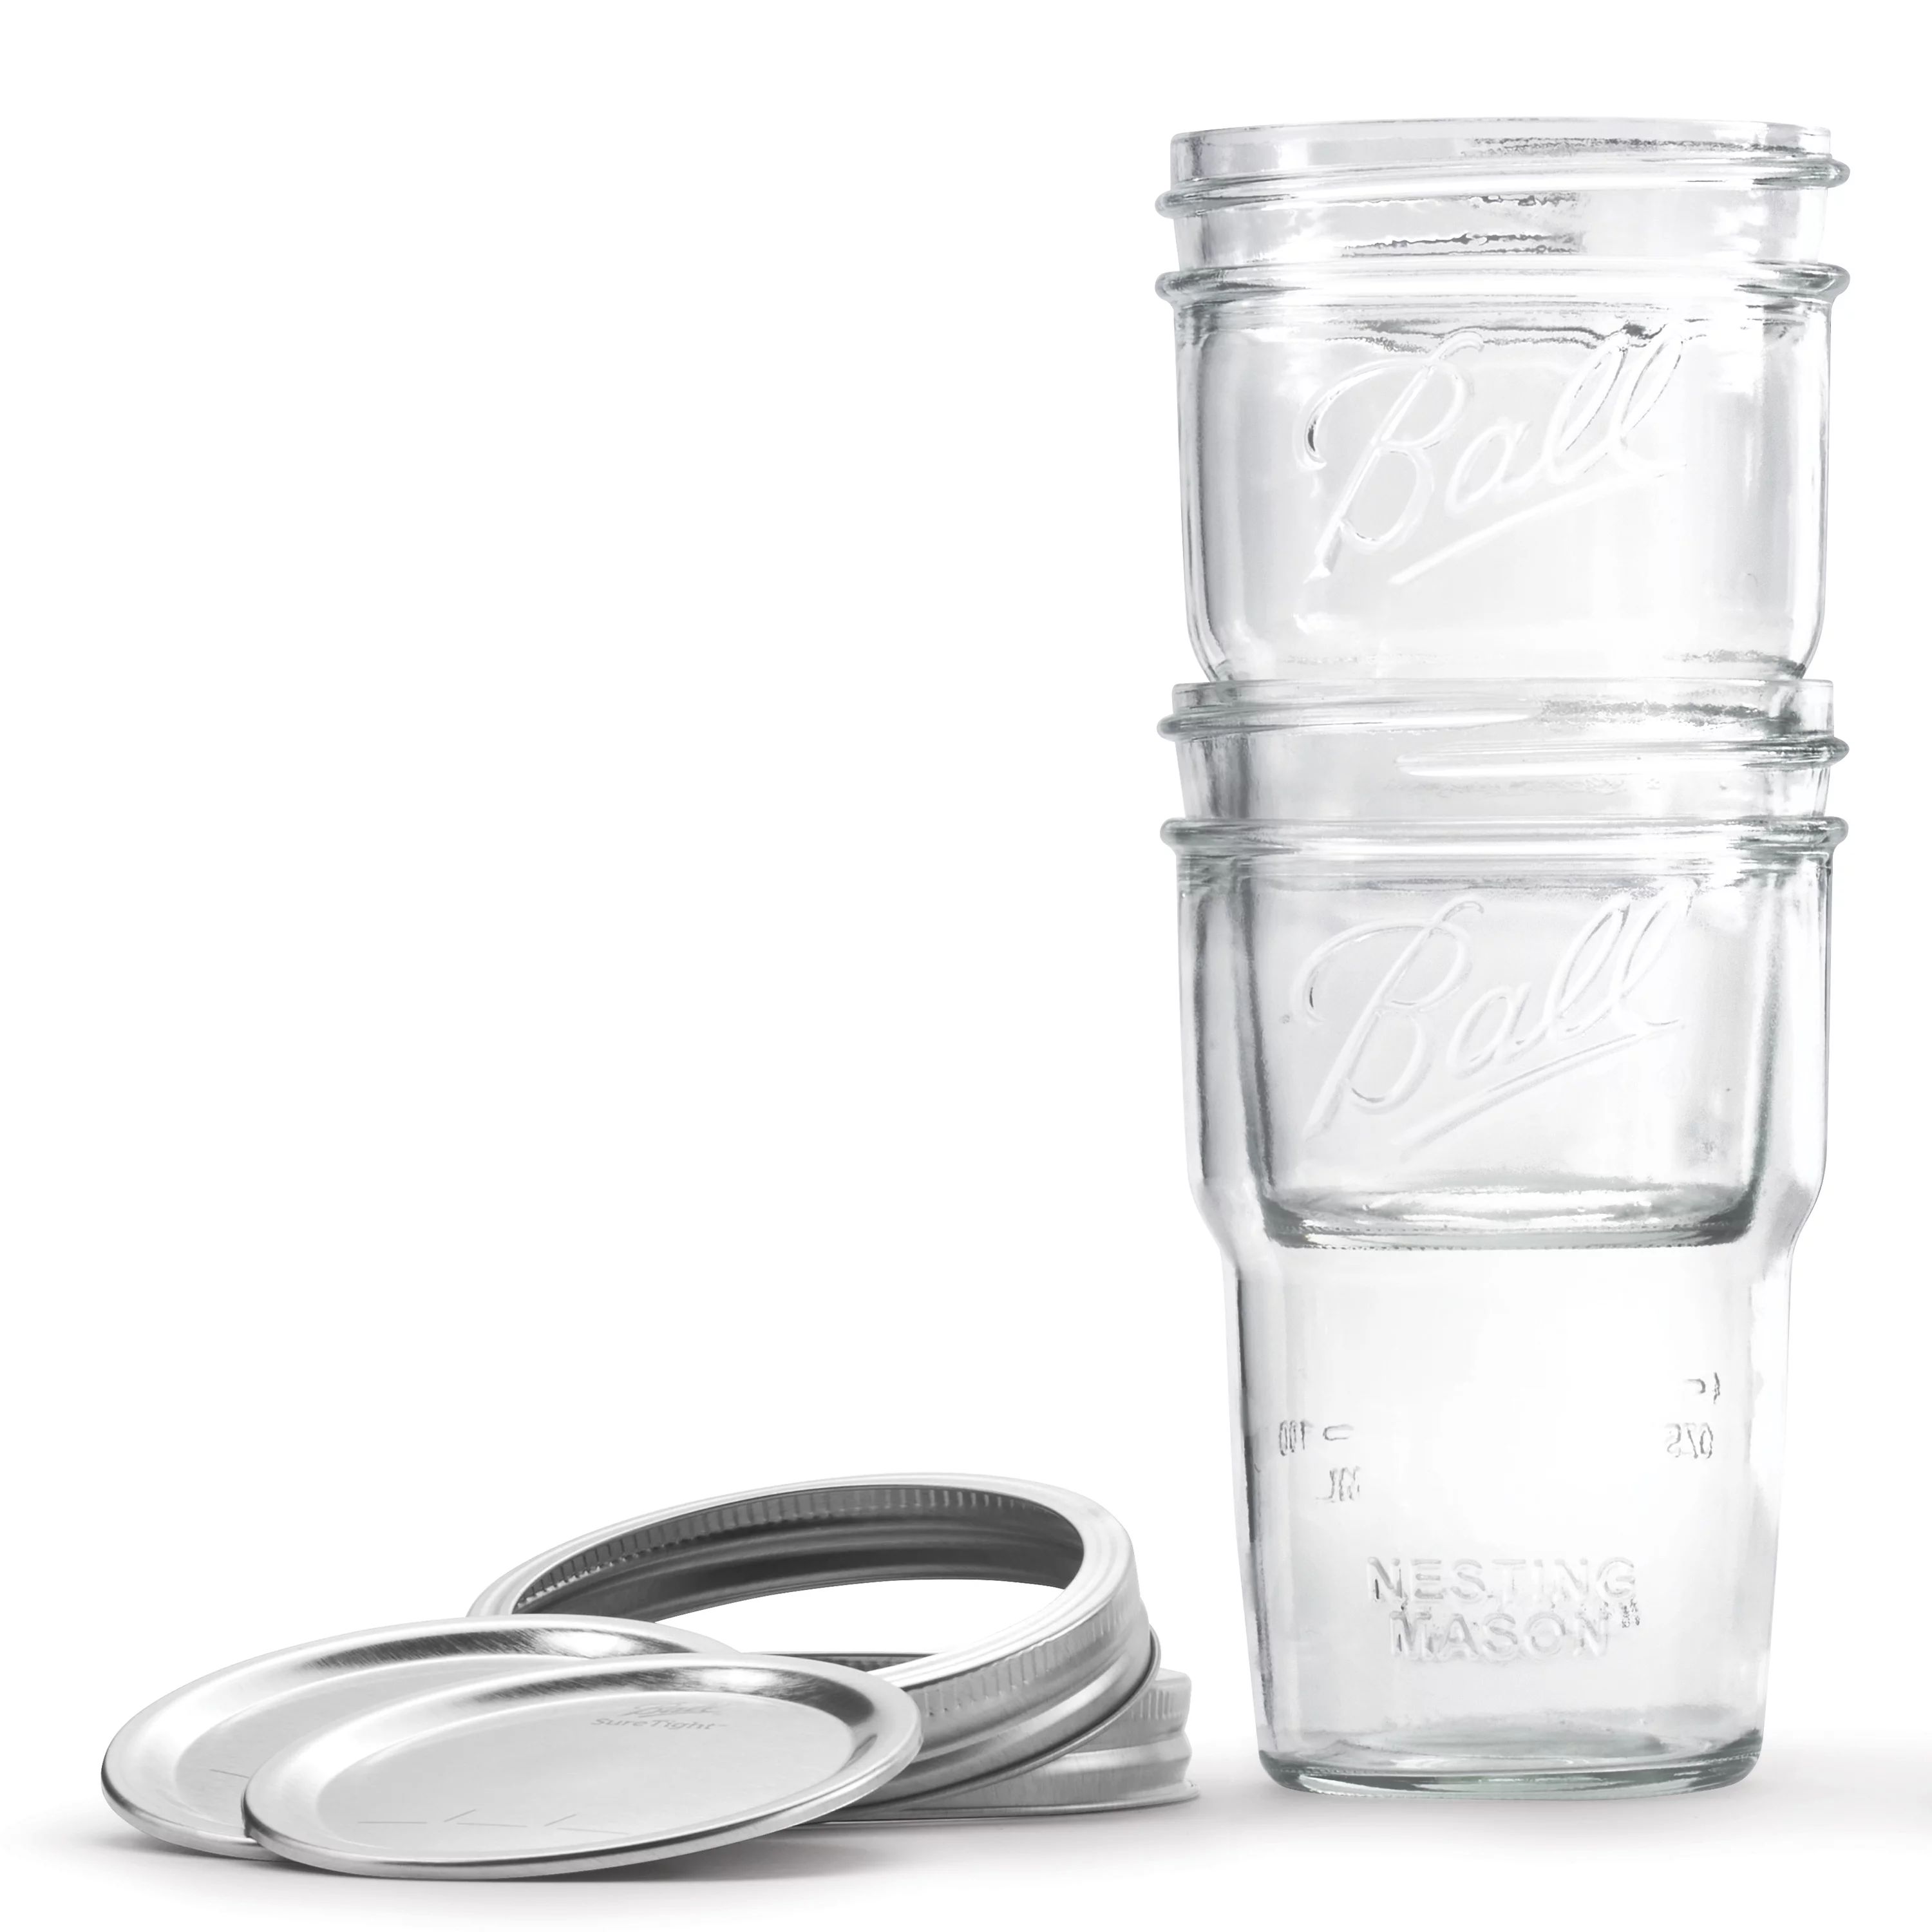 Ball Nesting Mason Jar Set with Lids & Bands for Canning or Drinkware, Wide Mouth, Pint, 4-Pack | Walmart (US)